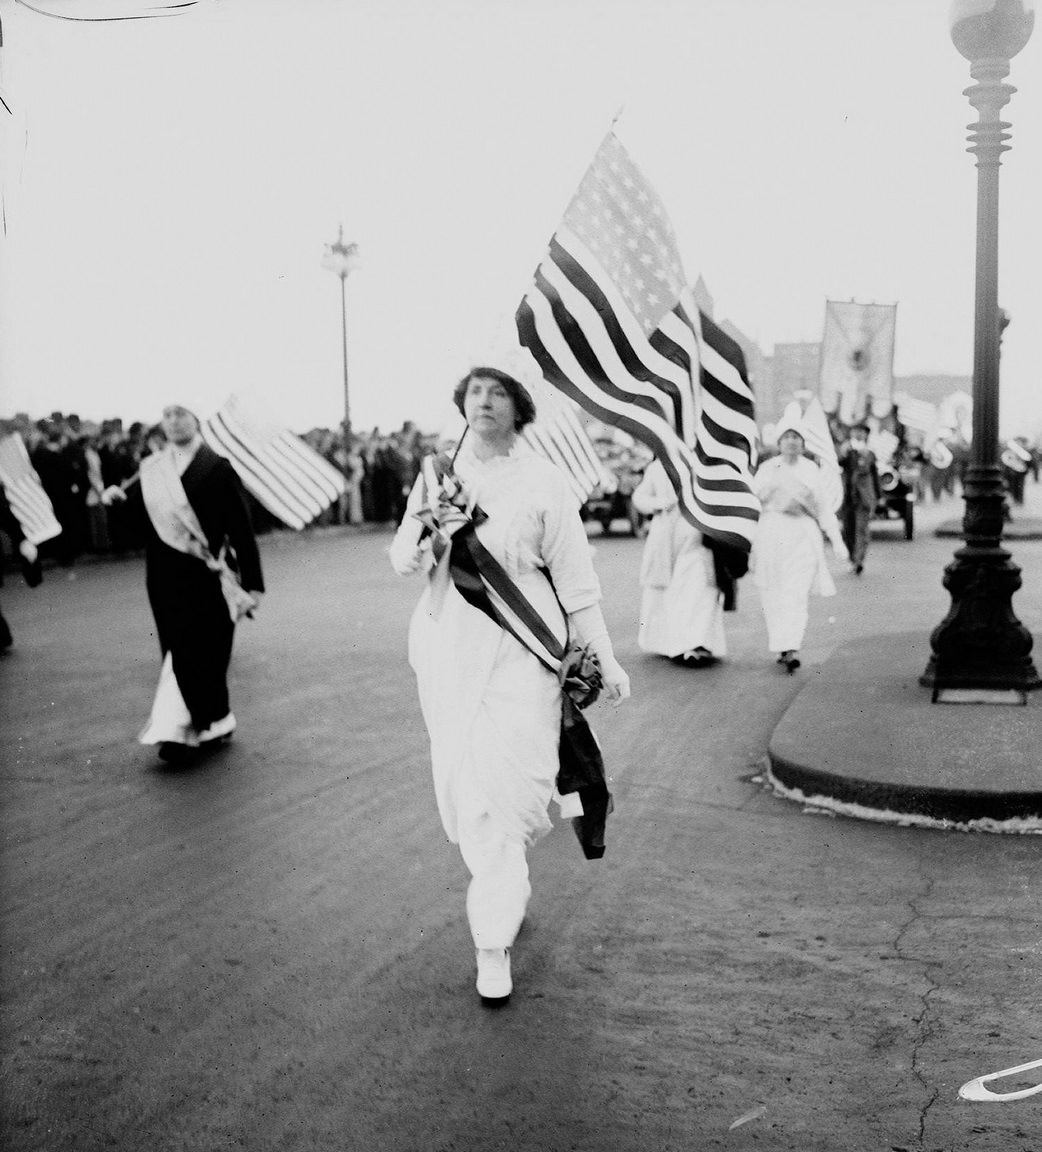 Grace Wilbur Trout wearing a sash, holding an American flag, marching north on South Michigan Avenue, with other suffragists holding flags marching nearby in a women's suffrage parade in the Loop community area of Chicago, Illinois, 1910s